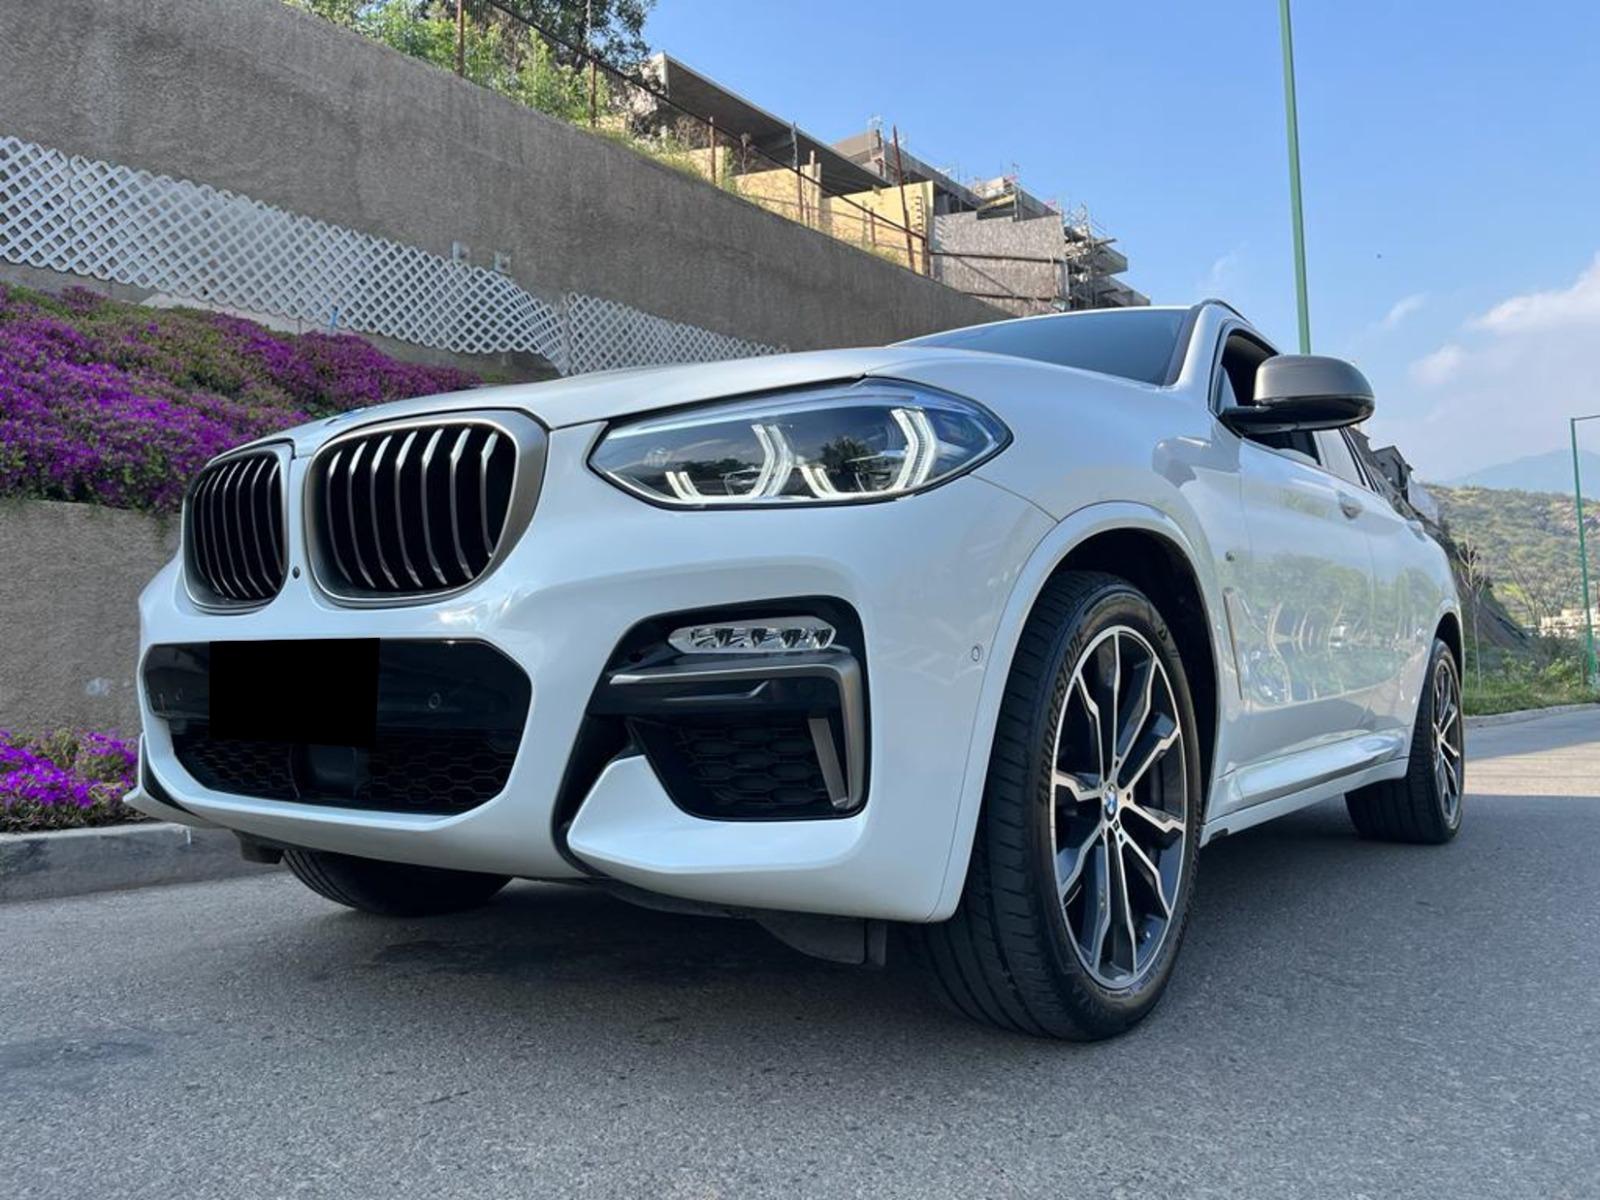 BMW X4 M40i 3.0 2020 SUV DEPORTIVA IMPECABLE - 